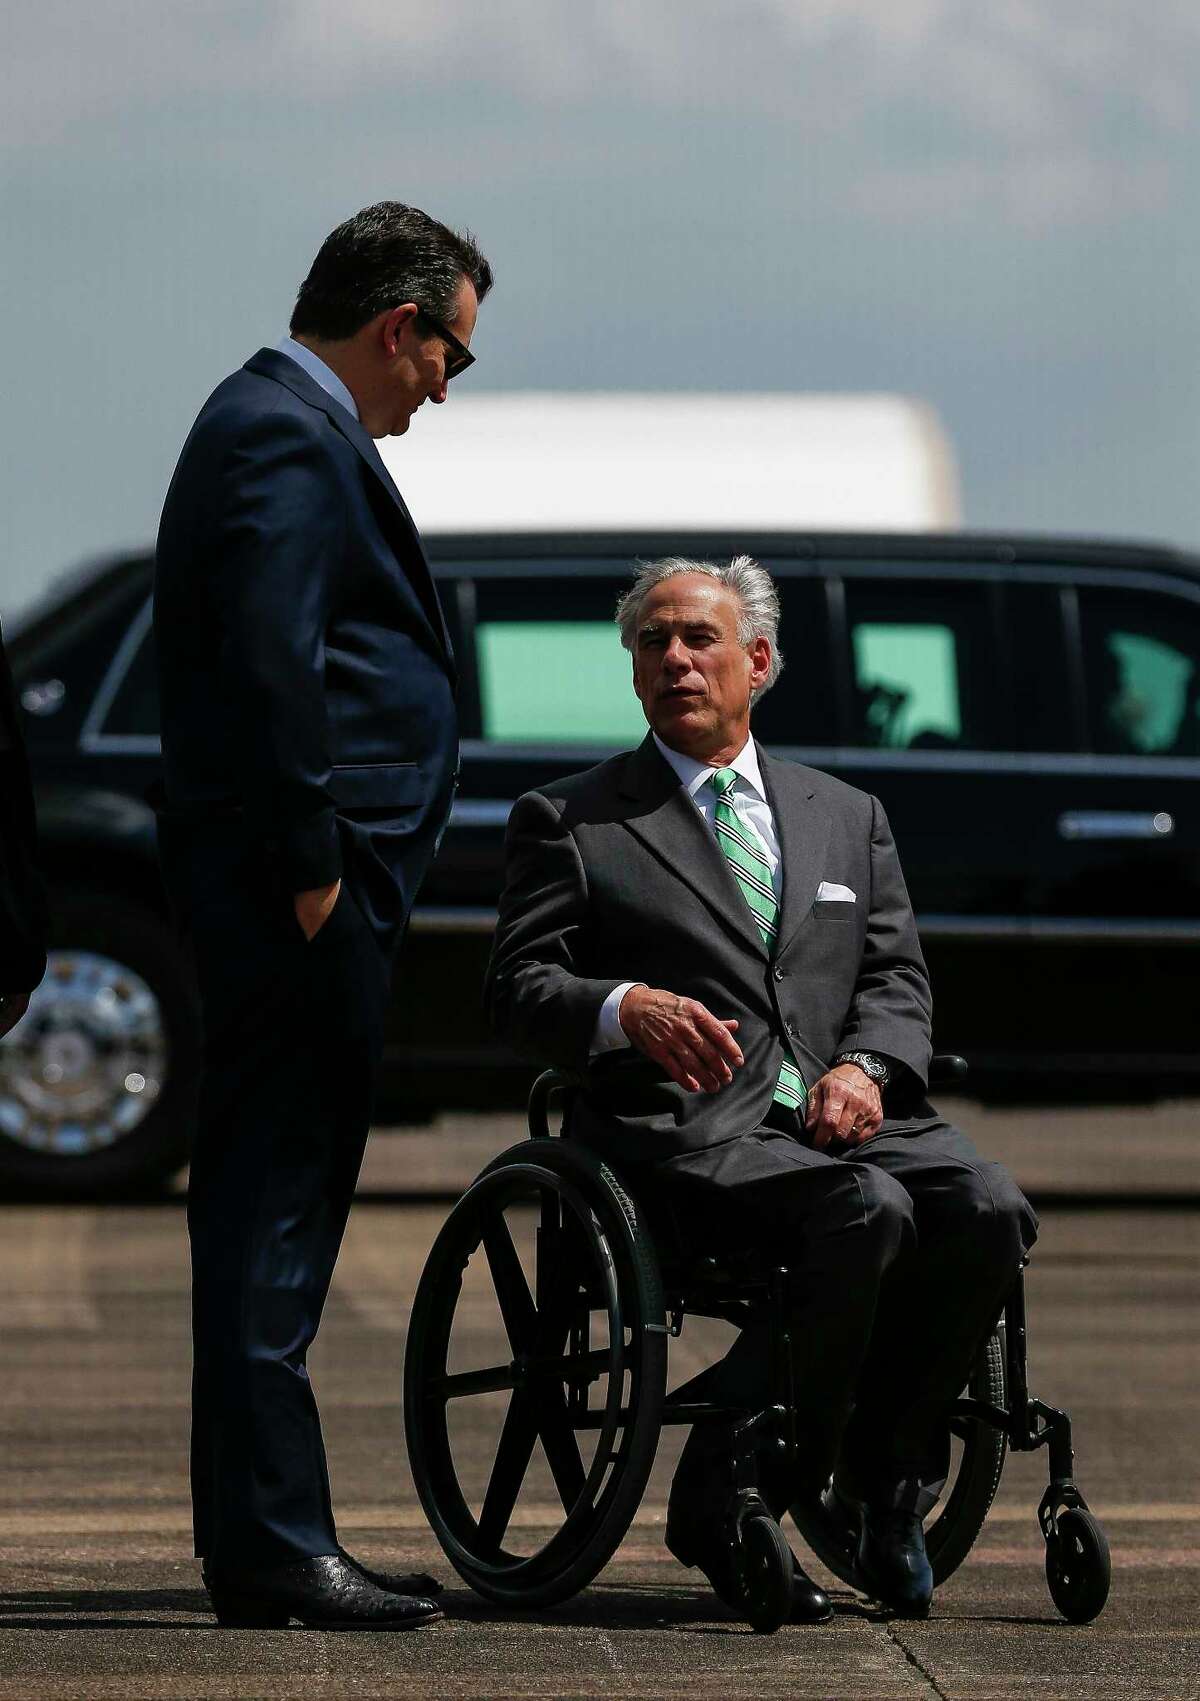 Senator Ted Cruz speaks with Governor Greg Abbott as President Donald Trump lands at Ellington Field Joint Reserve Base before meeting with those affected by the Santa Fe High School Shooting Thursday, May 31, 2018 in Houston.